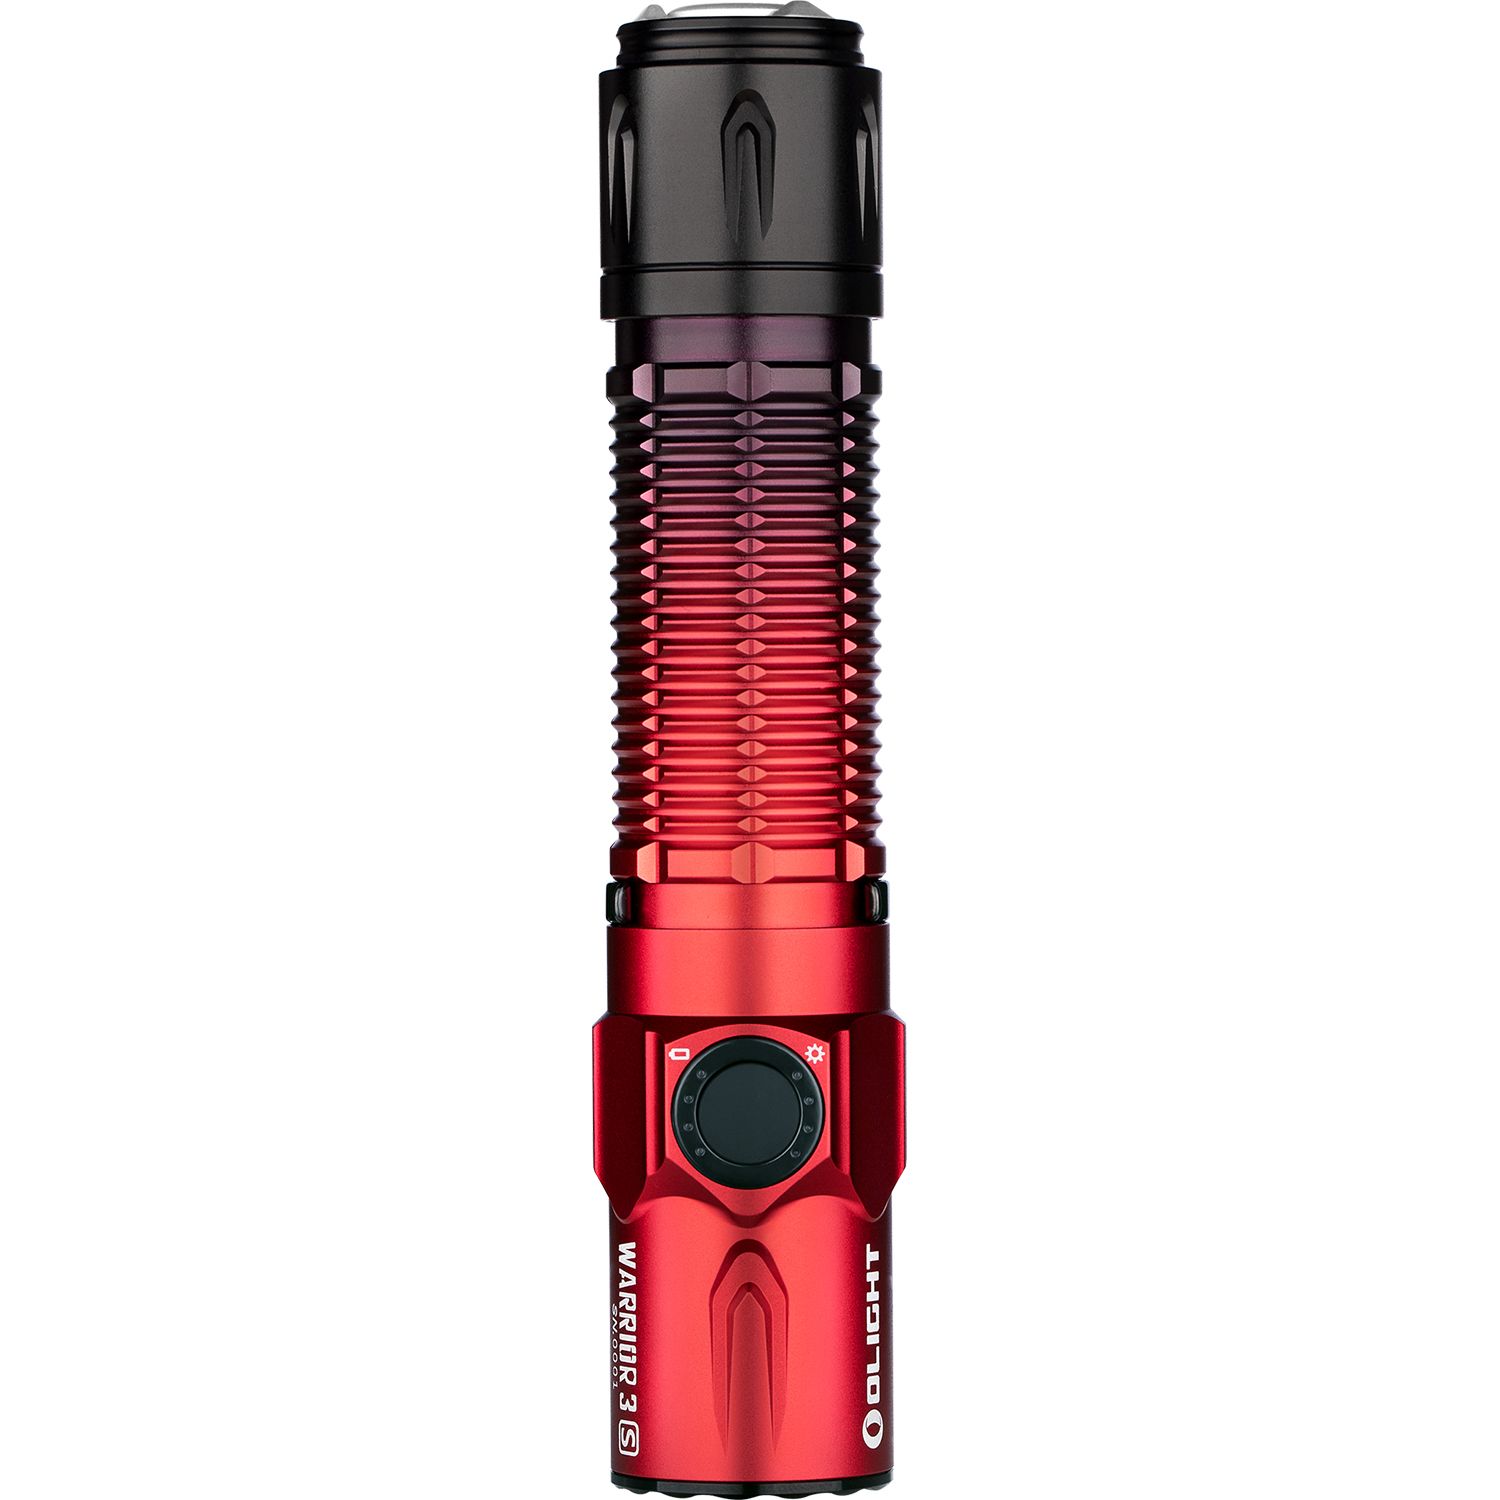 Olight Warrior 3S Limited Edition Tactical Rechargeable LED 